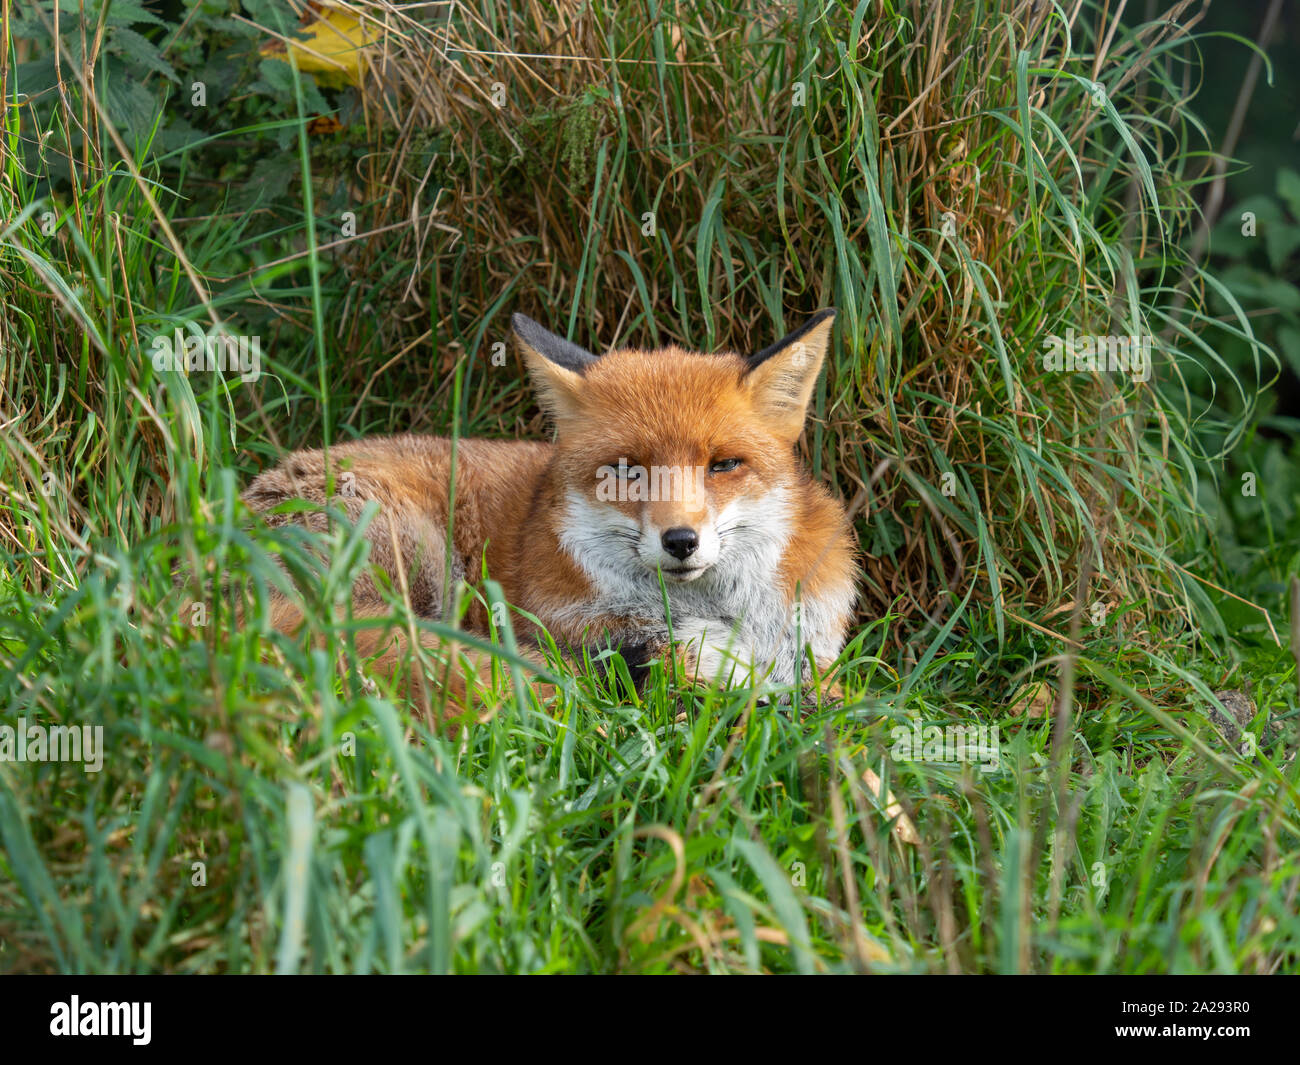 Red fox (Vulpes vulpes) close up with a grass background Stock Photo